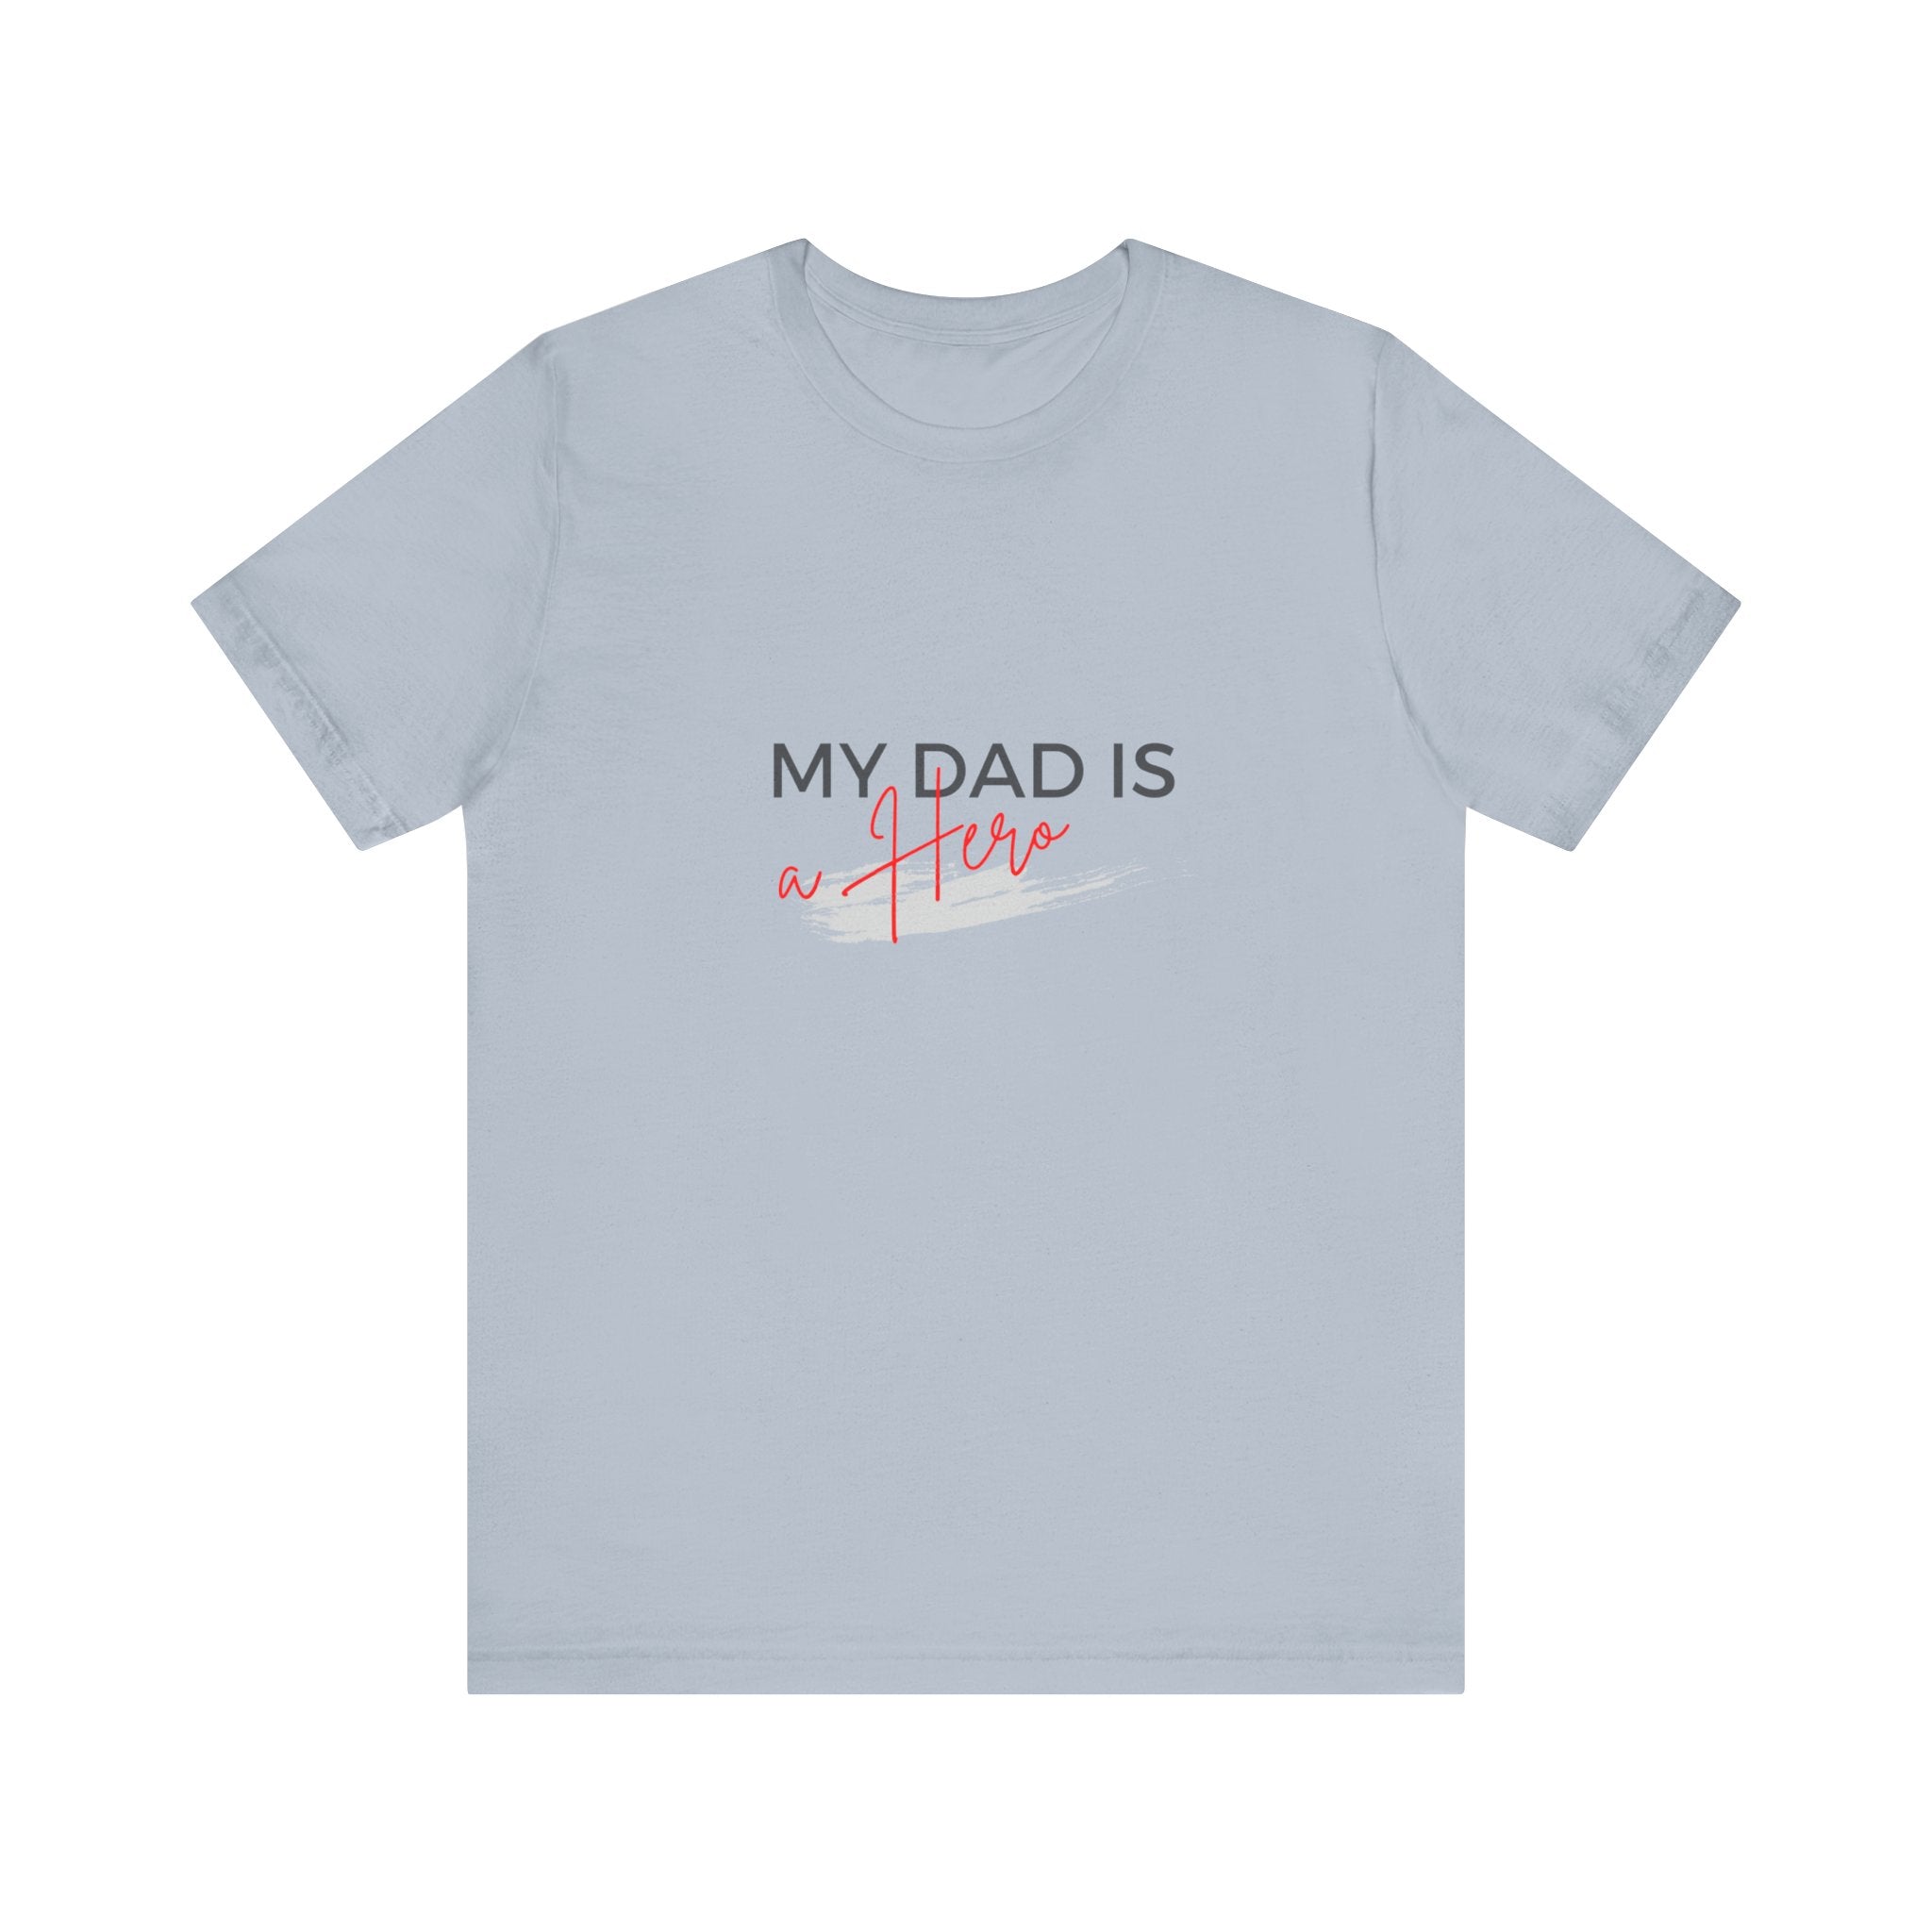 Fathers Day Crew Neck Tee, Unisex T-shirt, Regular Fit, Men's & Women's Clothing, Neck Labels